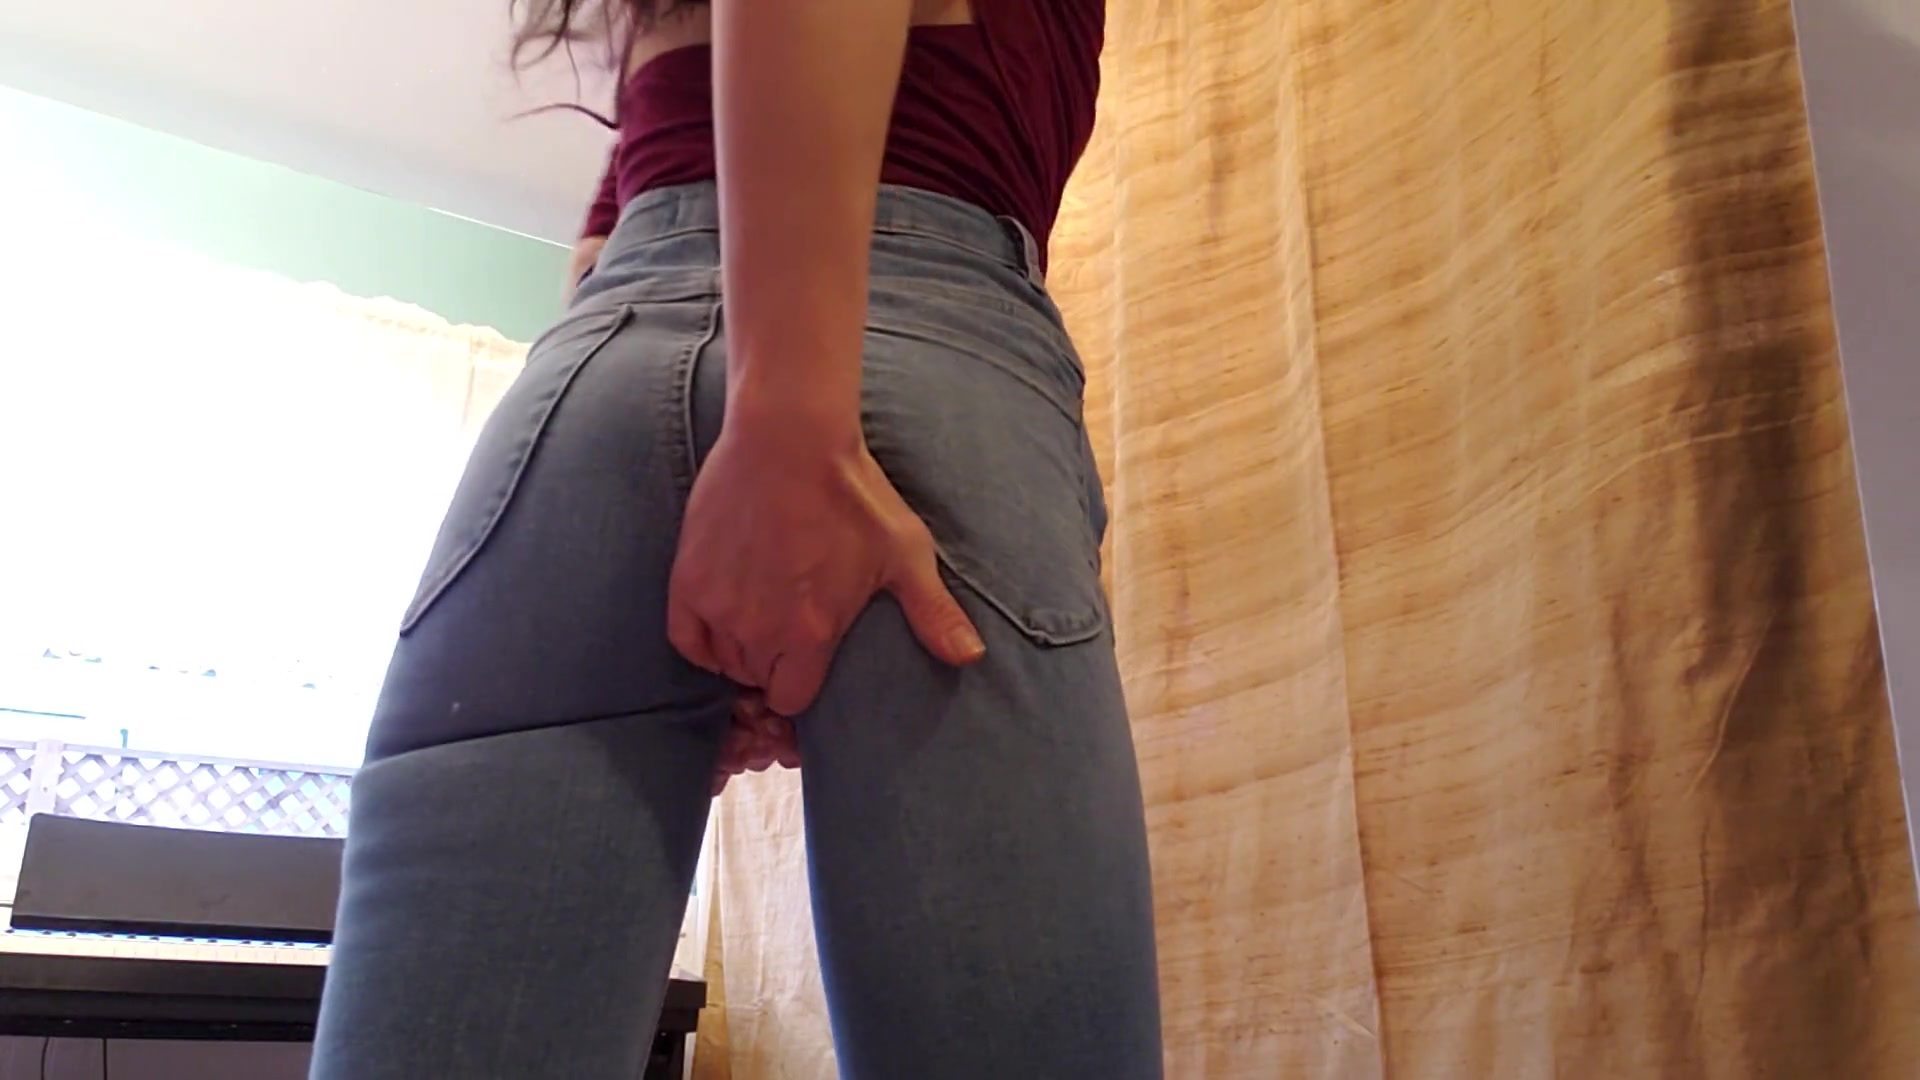 Very nice brunette wetting her jeans